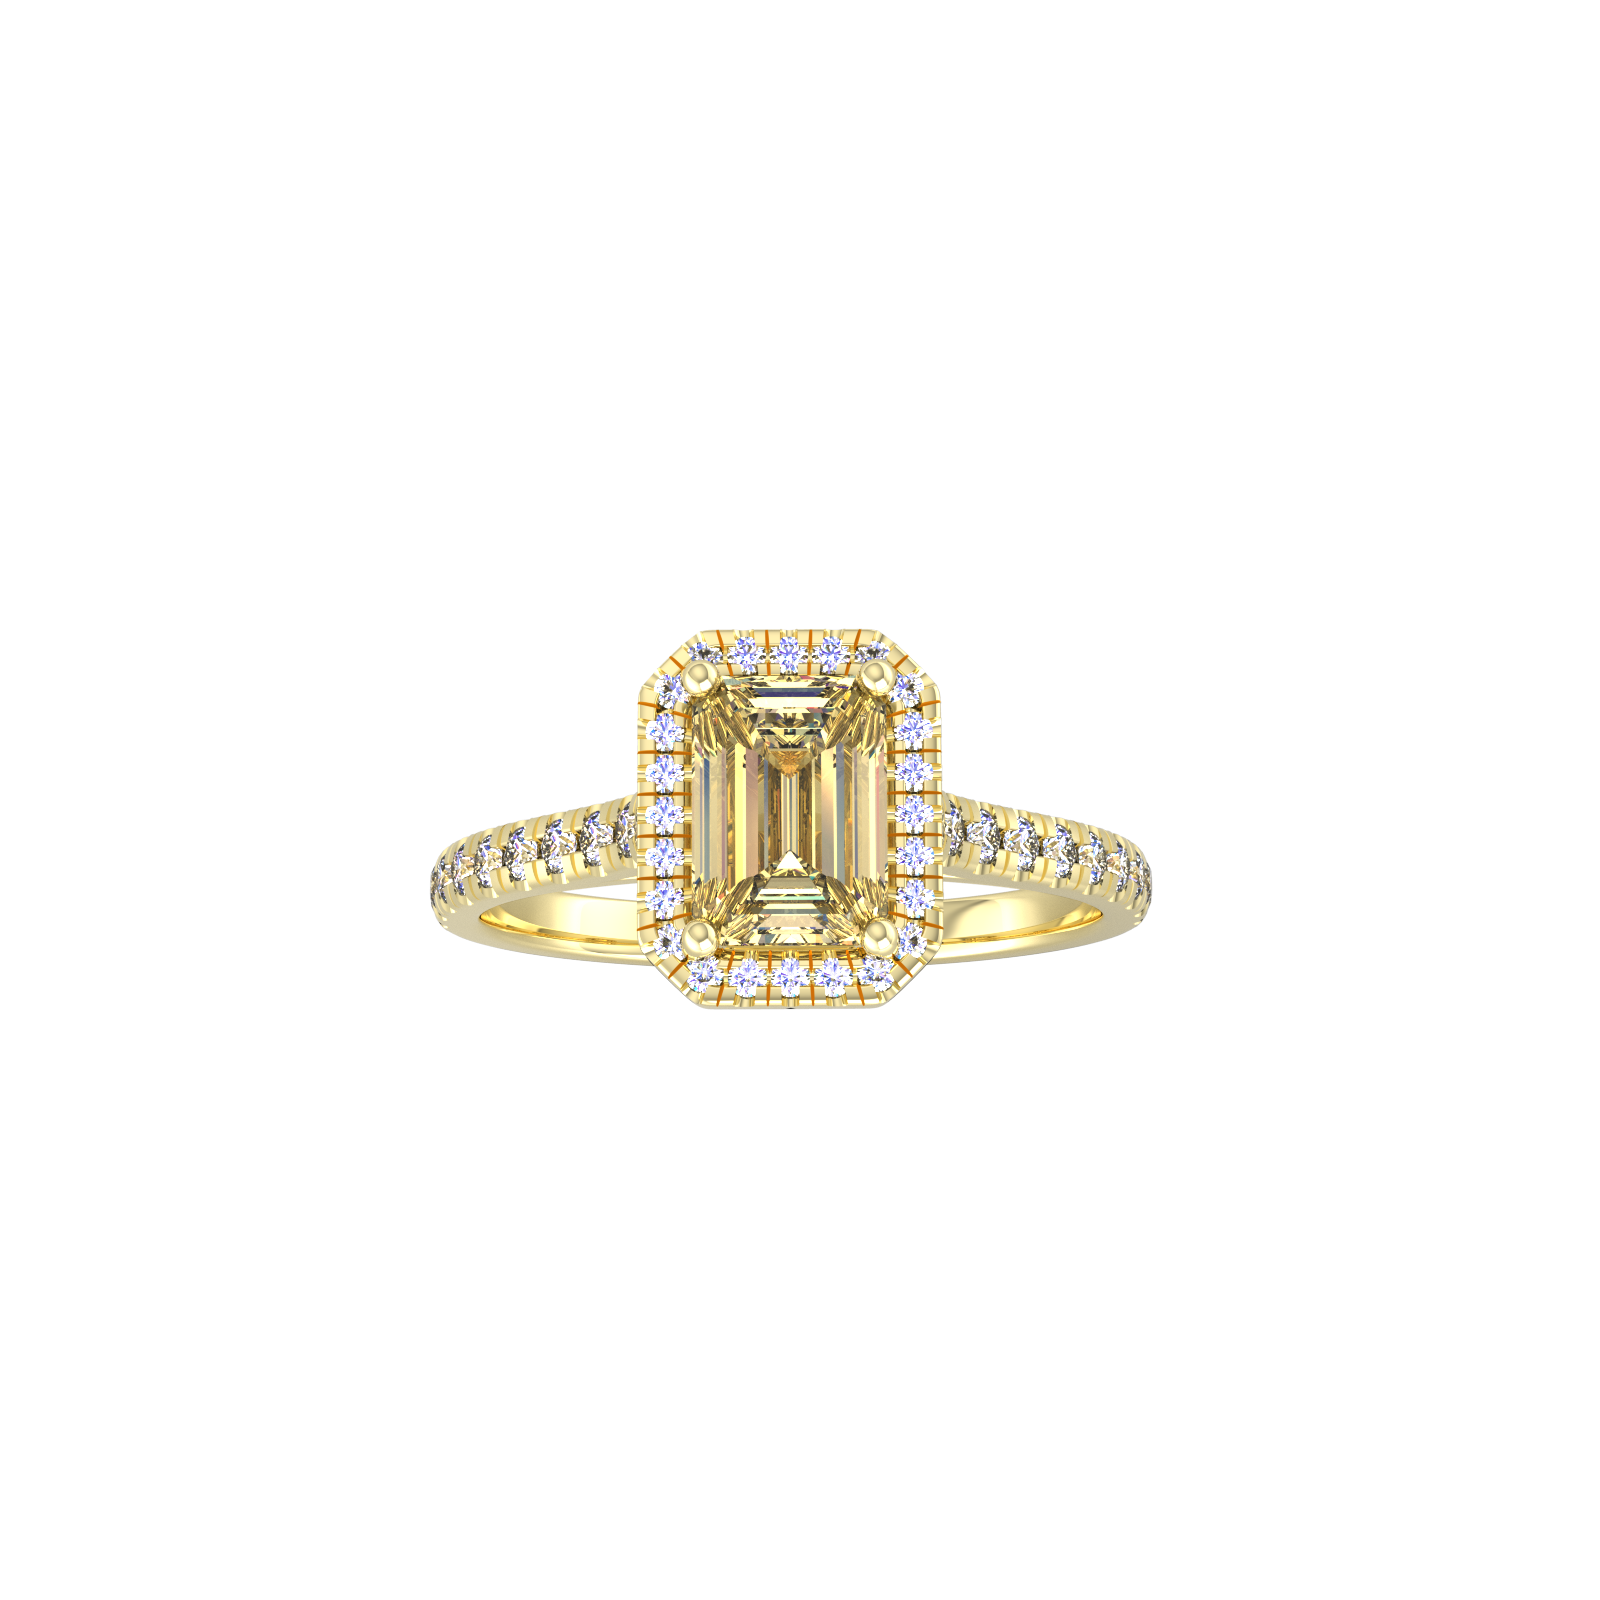 9ct Yellow Gold Citrine & Diamond Halo Ring with Diamond Shoulders - Ring Size H